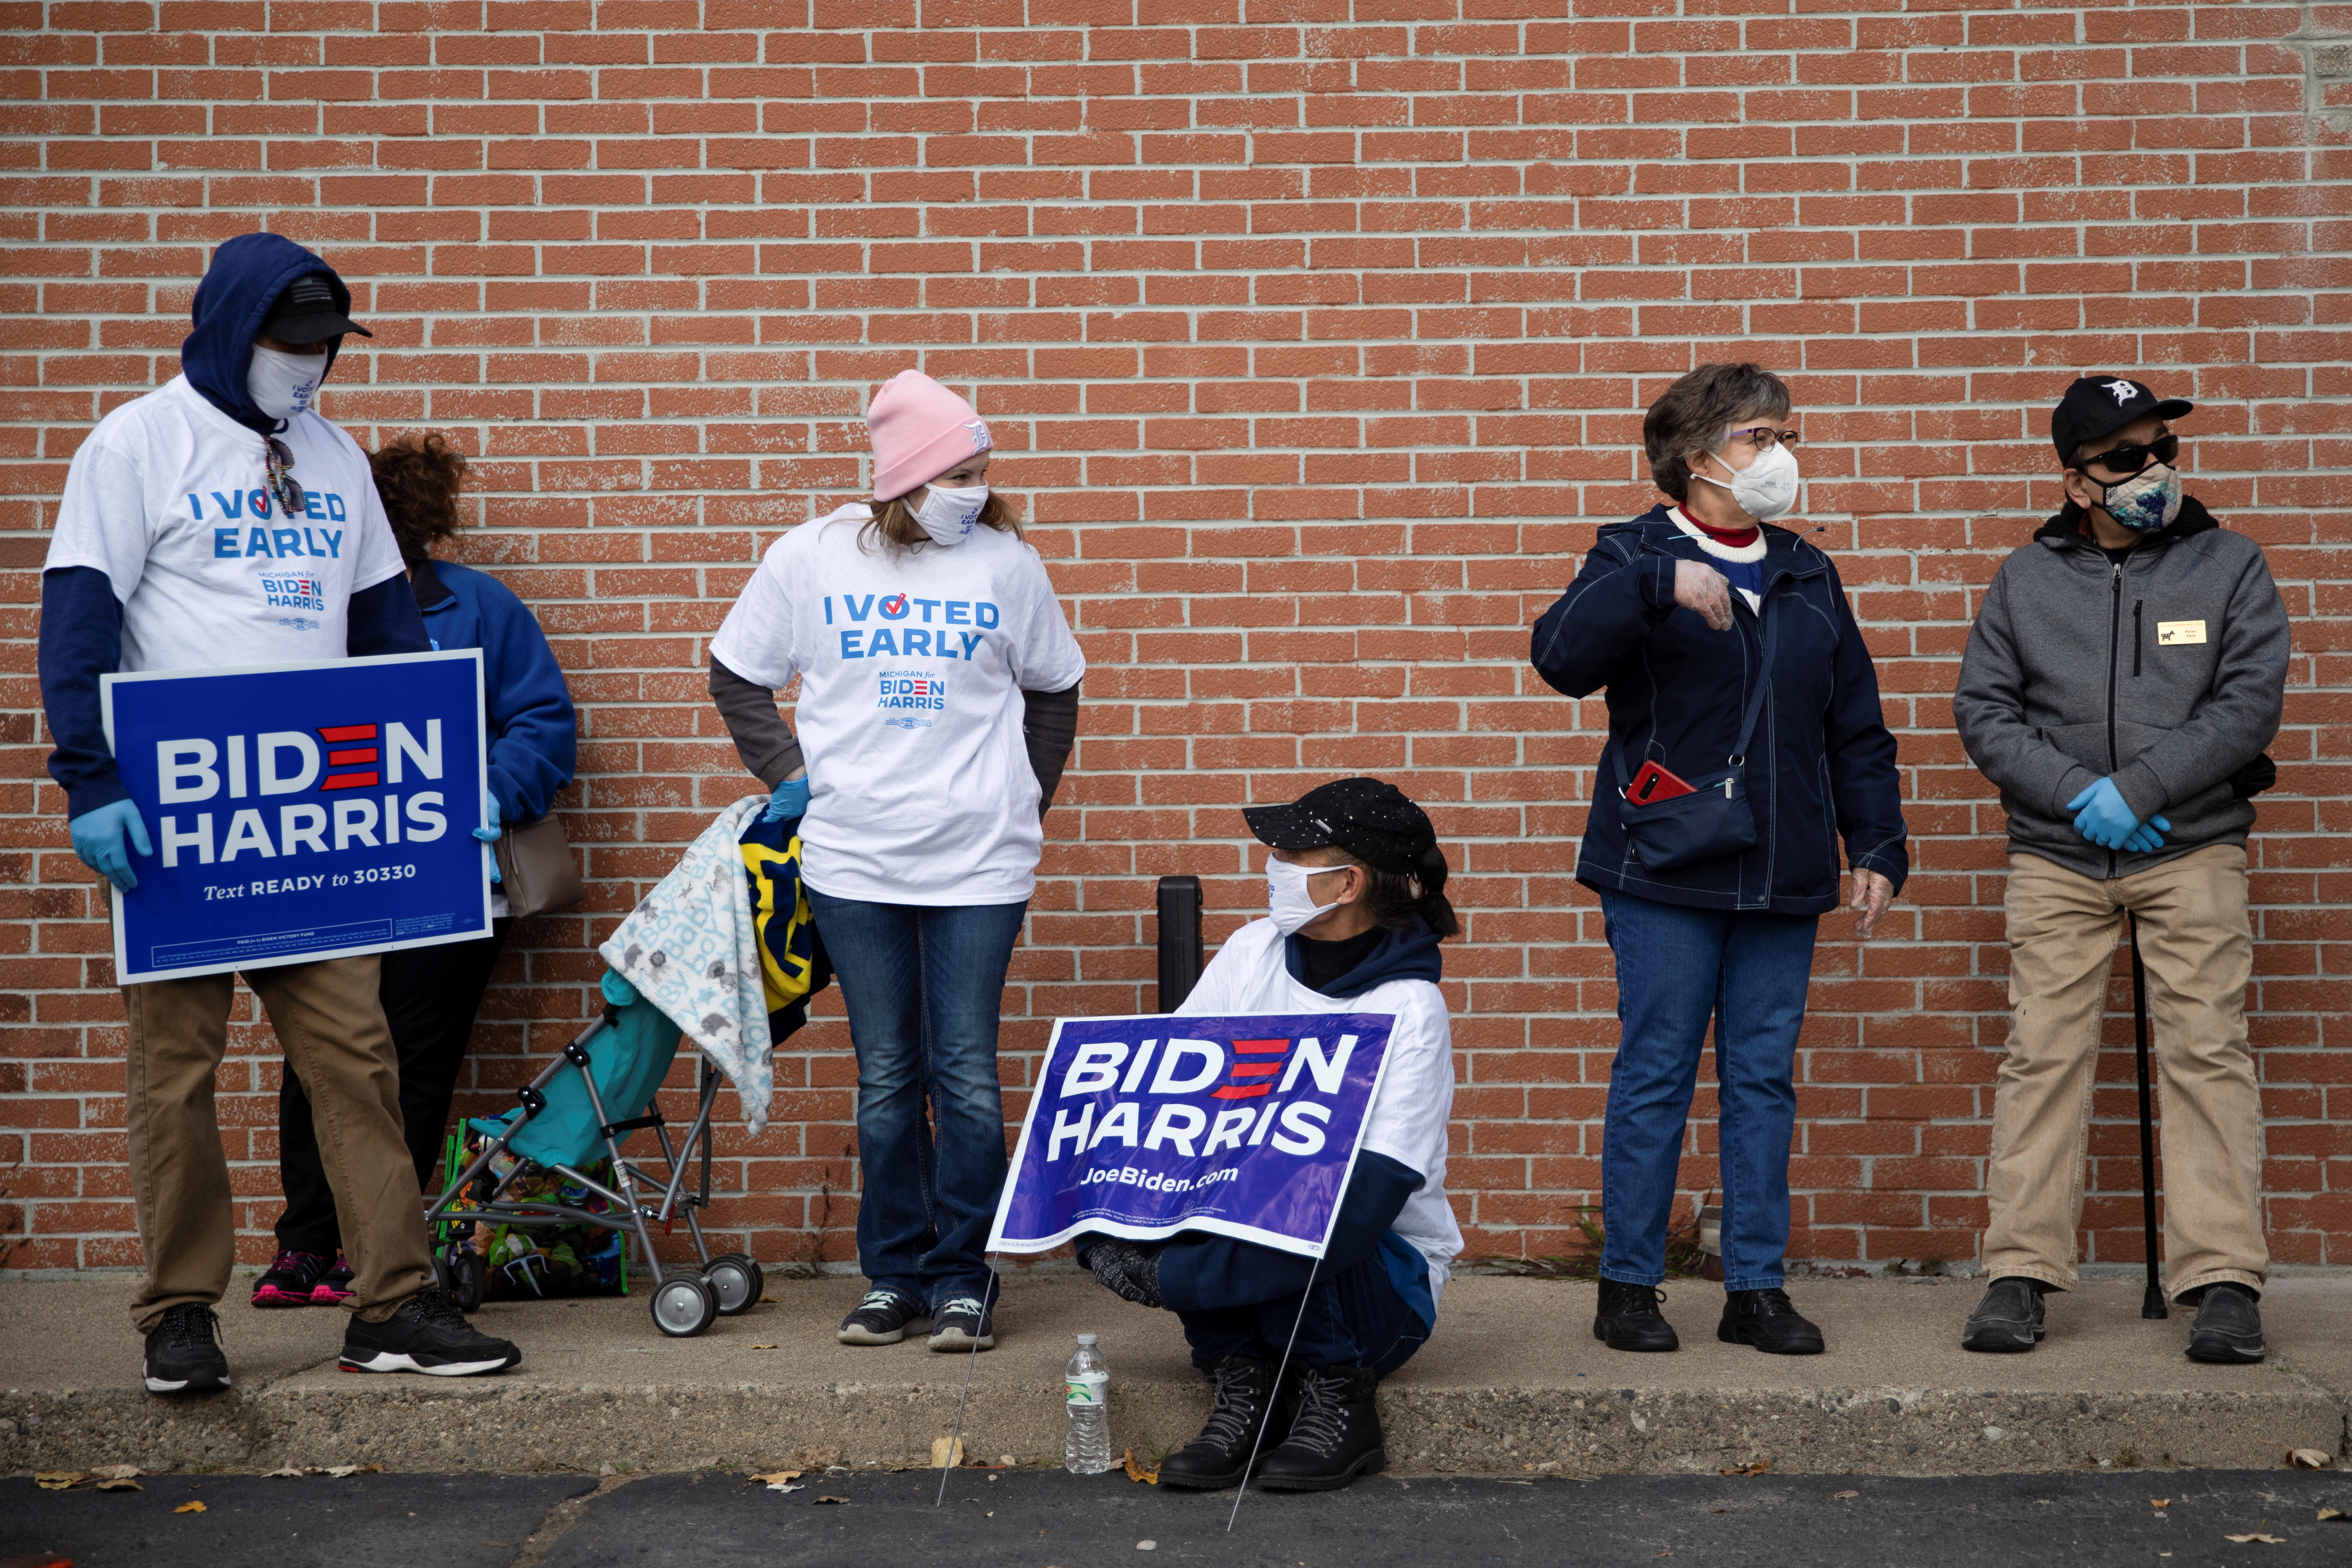 Voters wait in line for a campaign event to hear last-minute arguments from Jill Biden in Westland, Michigan, U.S., October 29, 2020. REUTERS/Emily Elconin